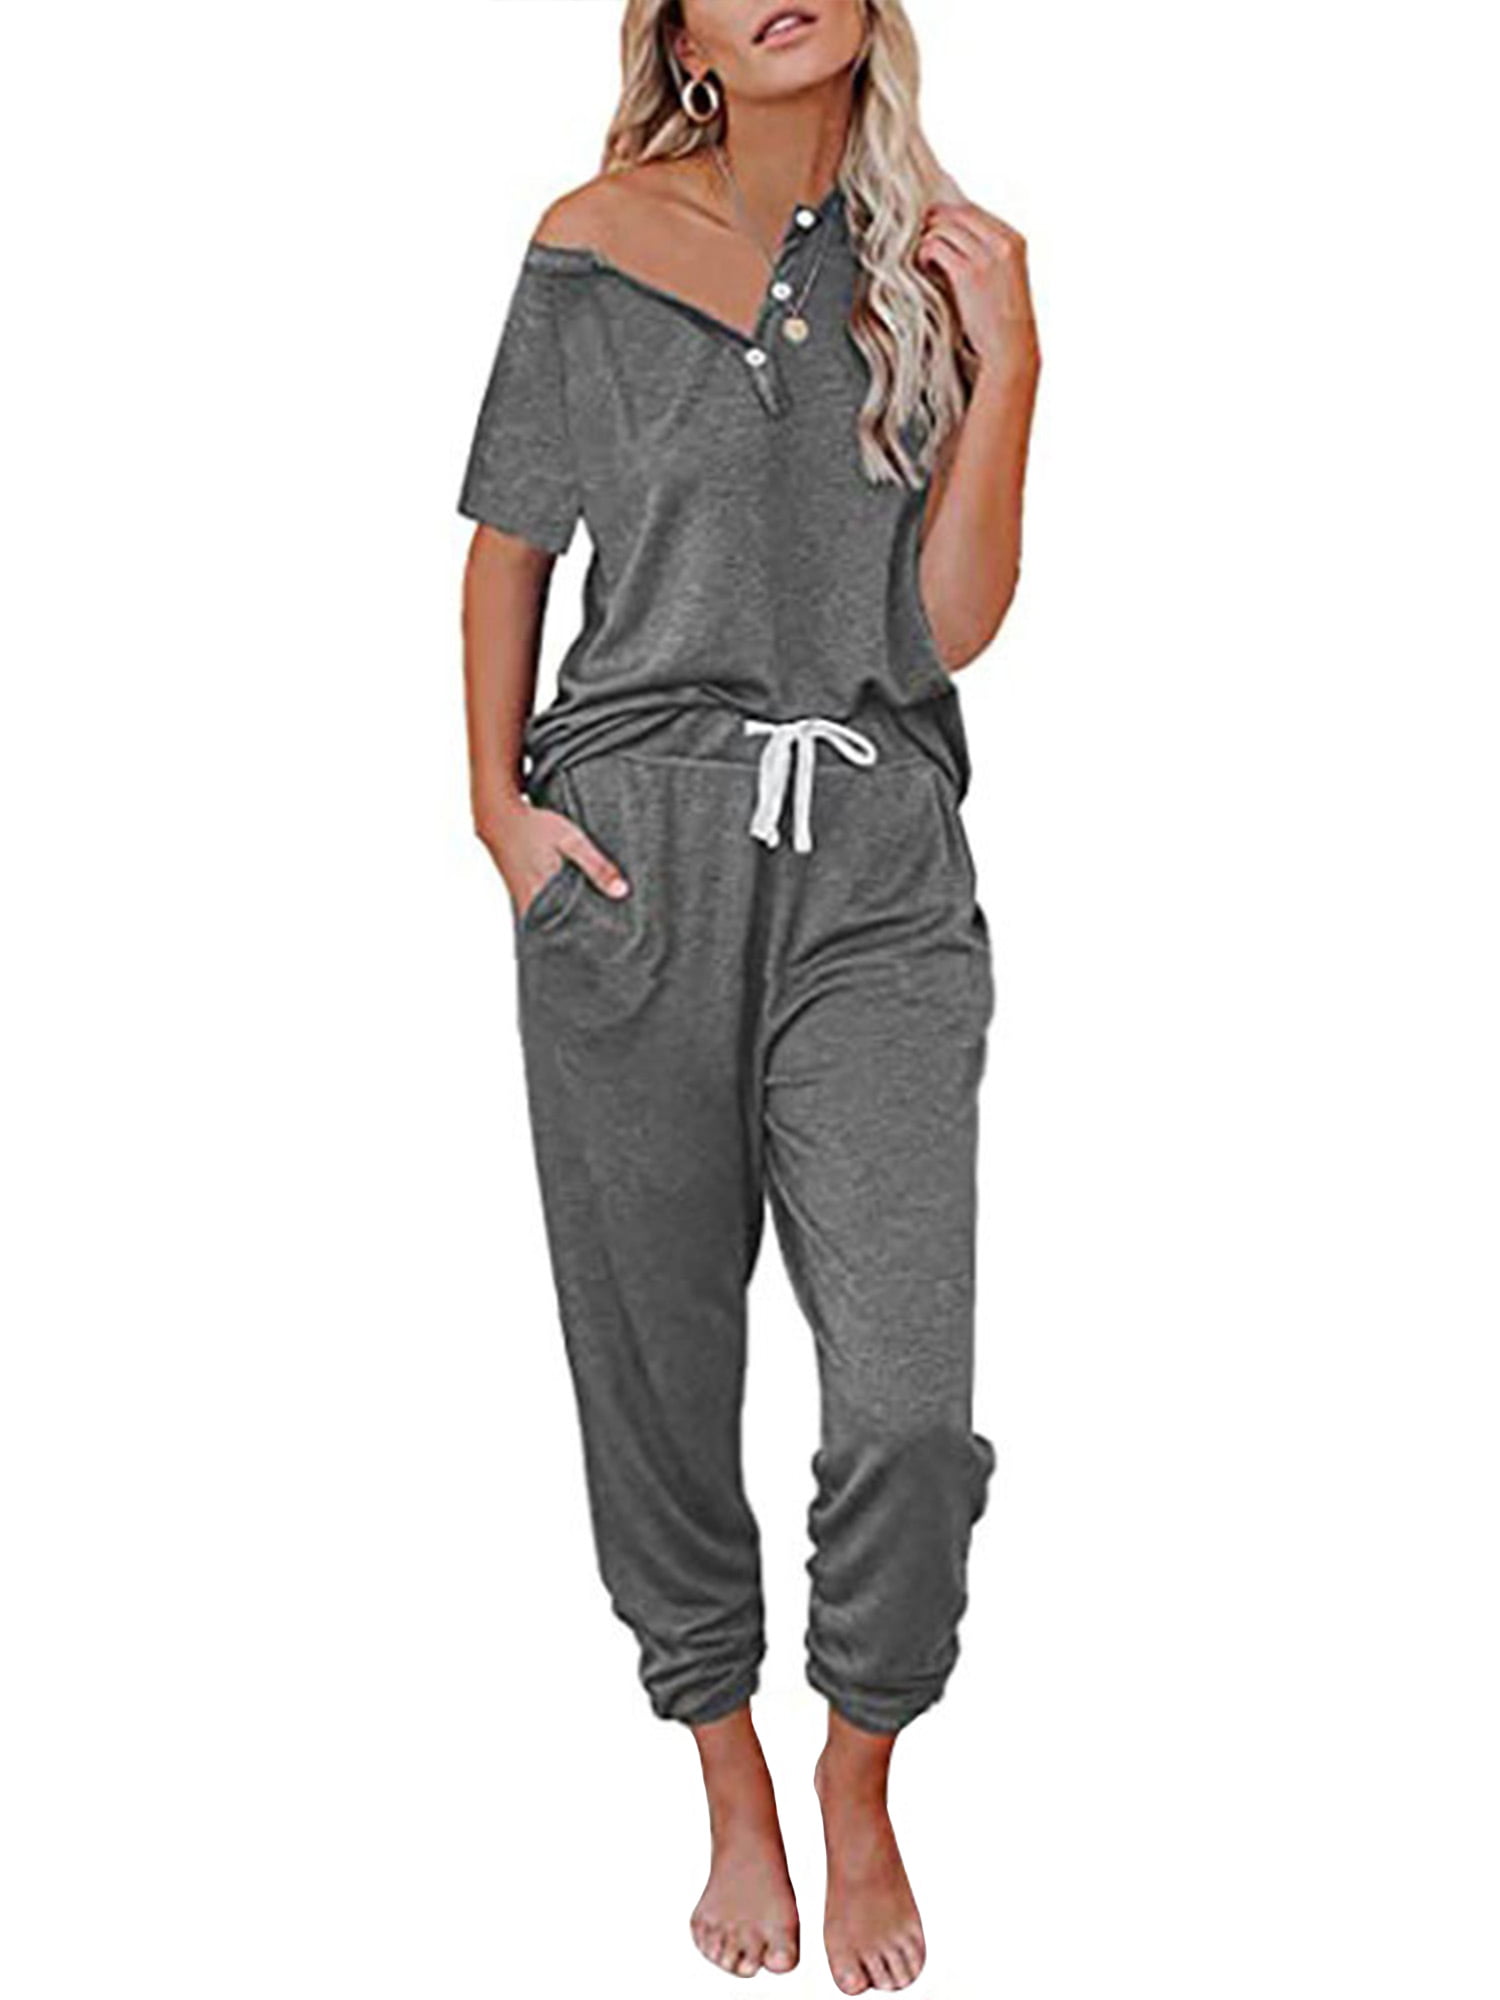 Lounge Sets for Women 2 Piece Outfit Sports Tracksuit Plus Size Lightweight T Shirt Tops Shorts Jogger Set